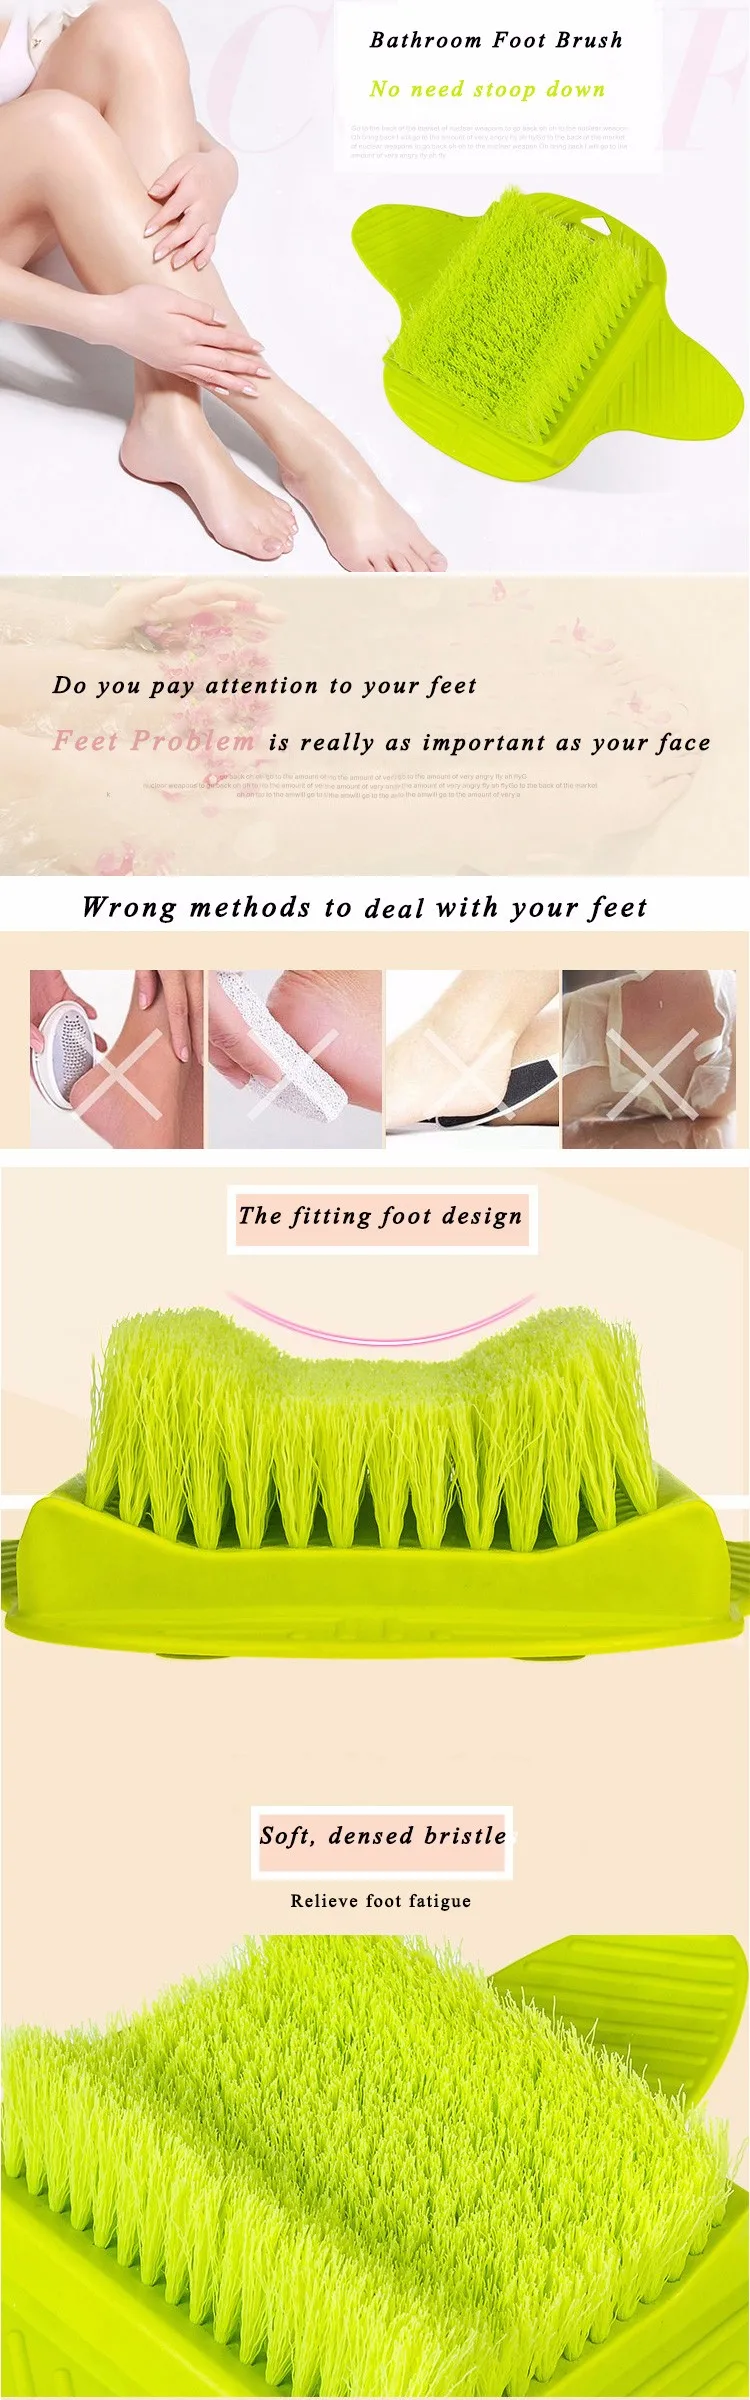 Finesource Foot Care Clean Brush and Massager Silicone Shower Cleaning Bath Scrubber Washing Foot Tool Exfoliating Foot Cleaner